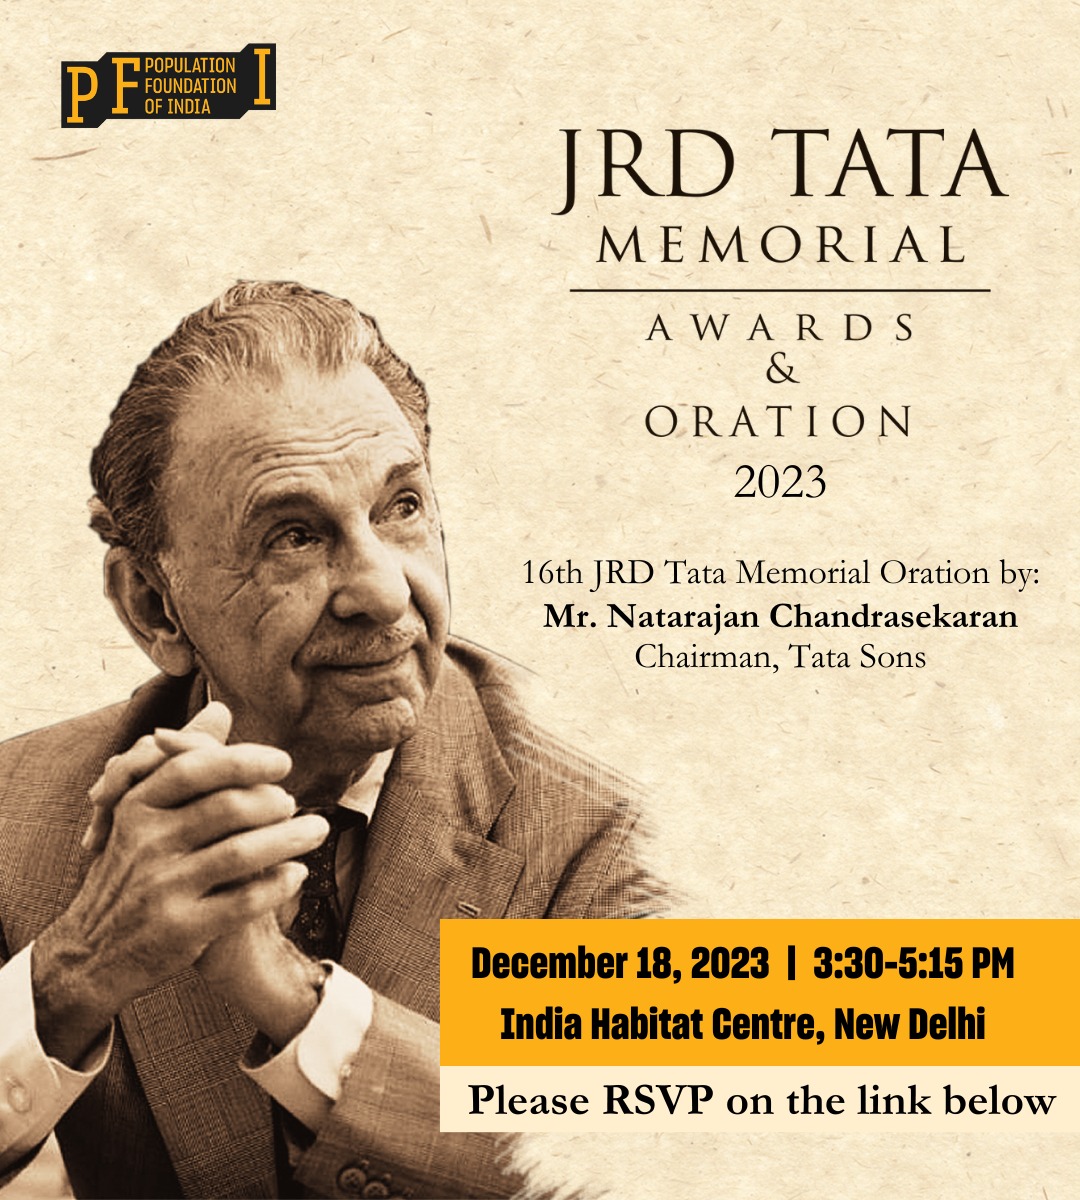 We are delighted to invite you and your colleagues to the #JRDTata Memorial Awards and Oration 2023! Date / Time: 18 December, 2023, 3:30 to 5:15 pm IST Location: #IndiaHabitatCentre, New Delhi. #RSVP Link: forms.gle/358Pat8jY5PTqj…